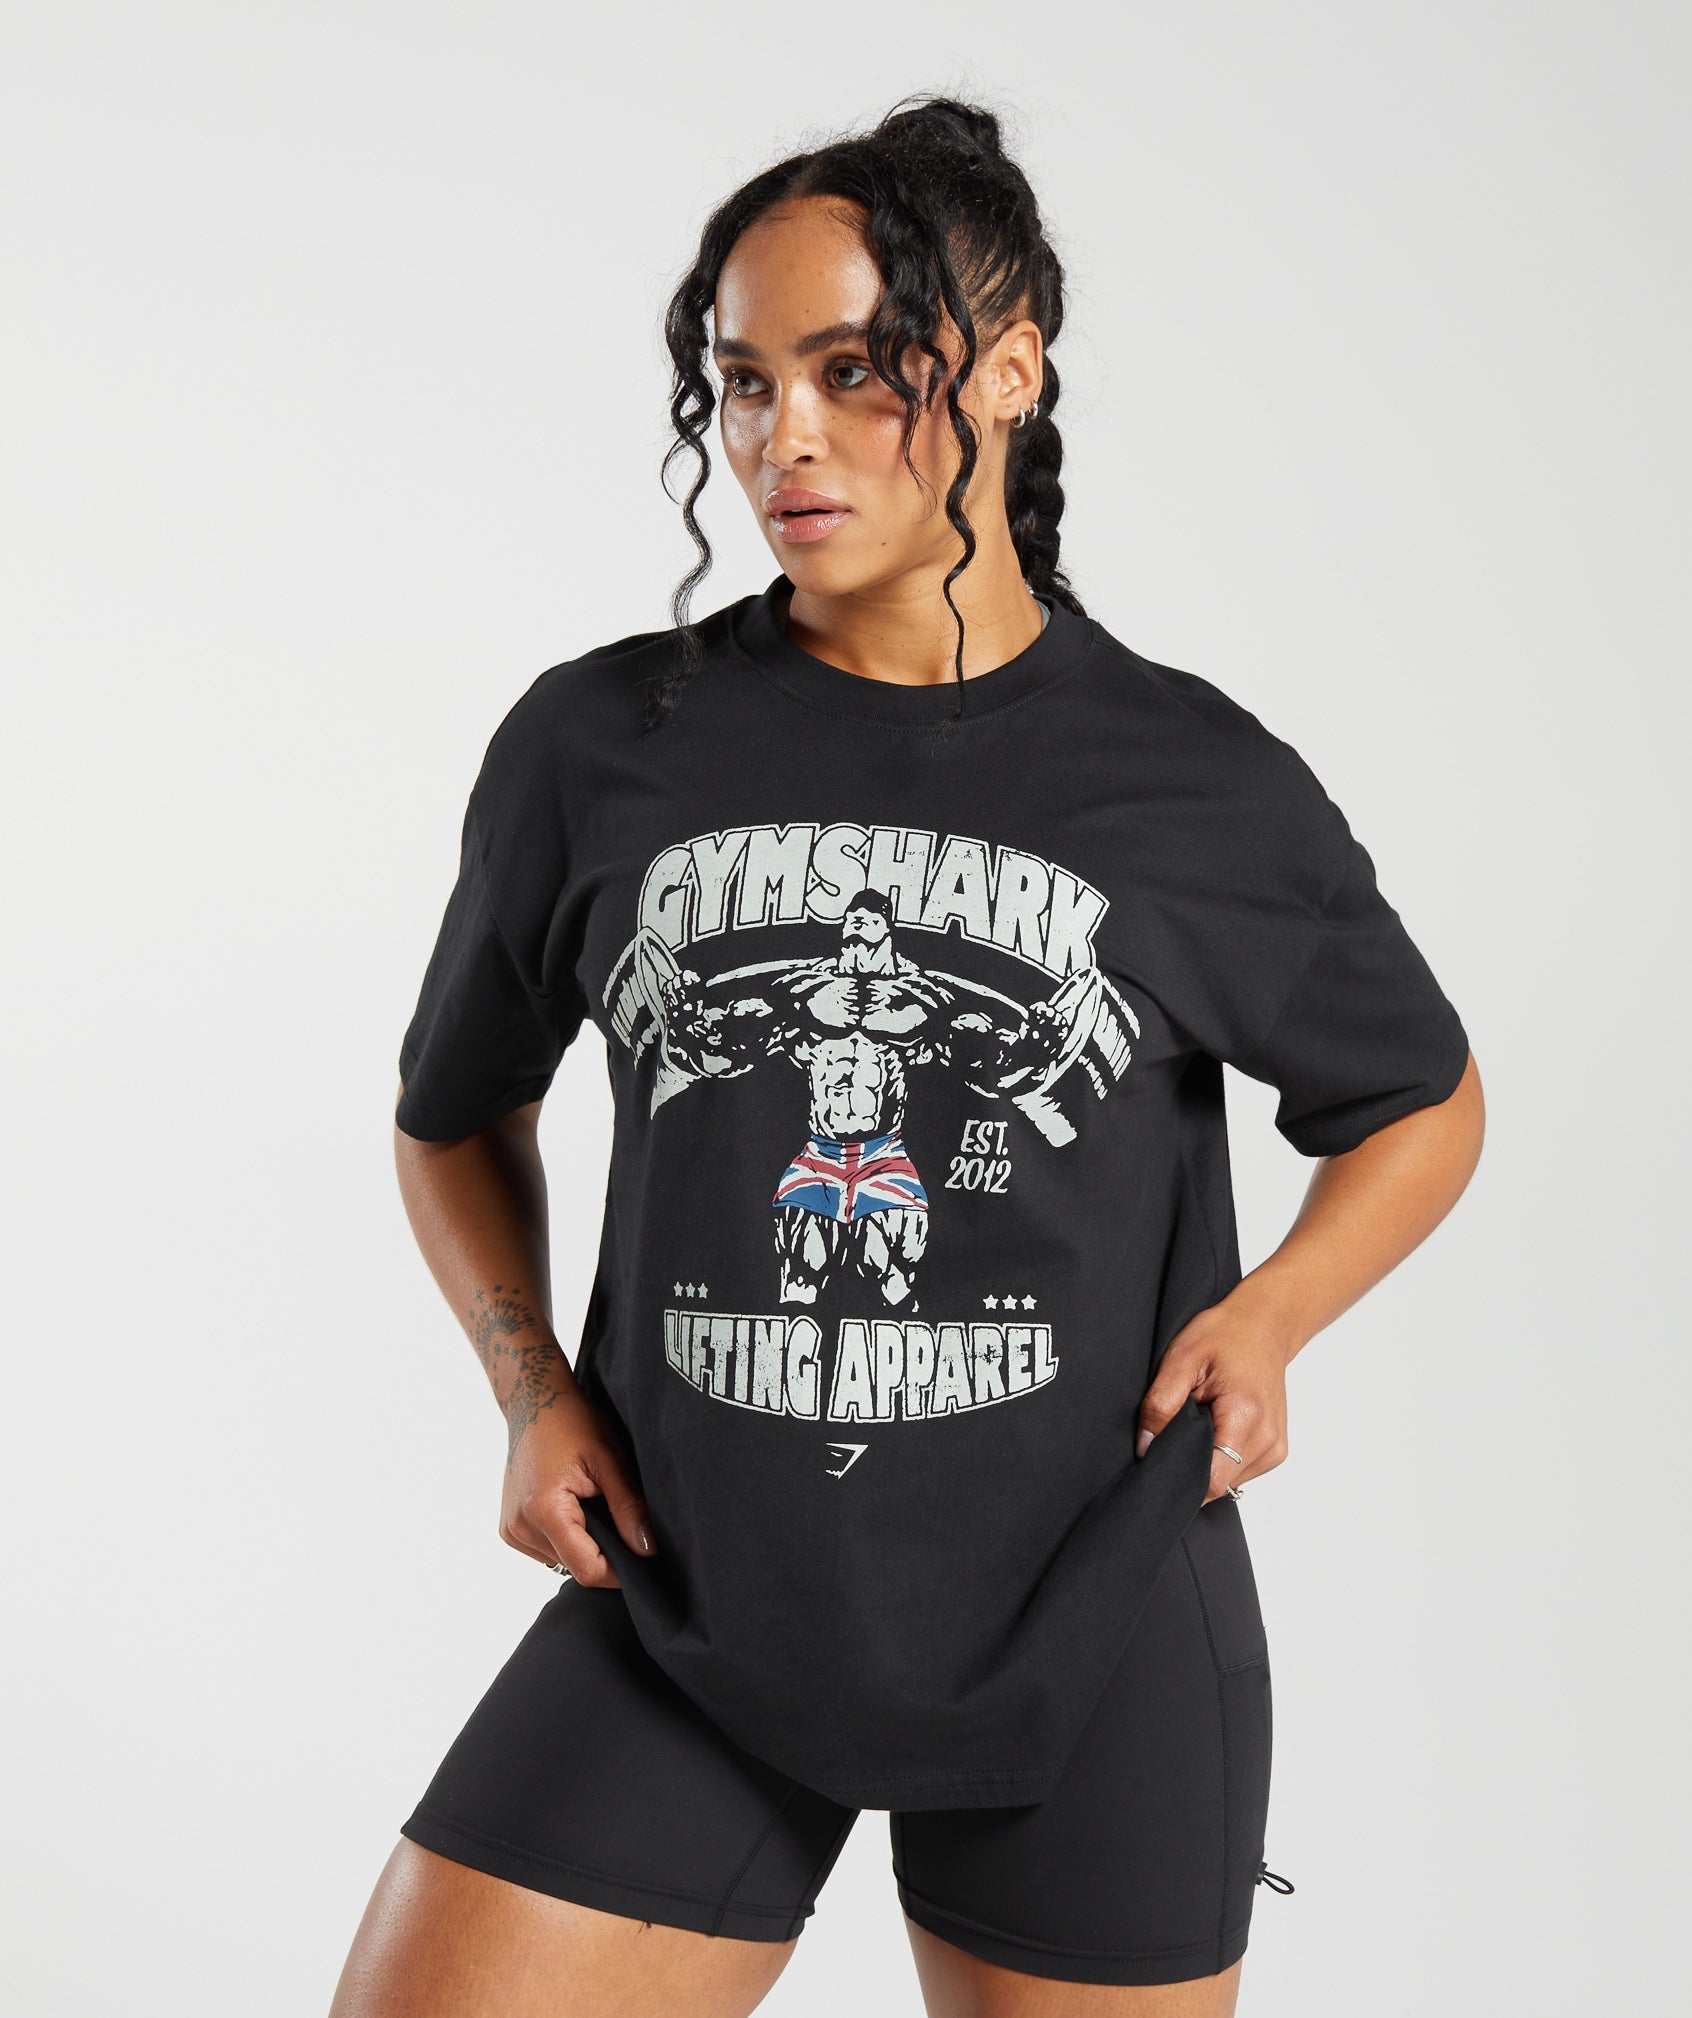 Lifting Apparel Oversized T-Shirt in Black - view 1